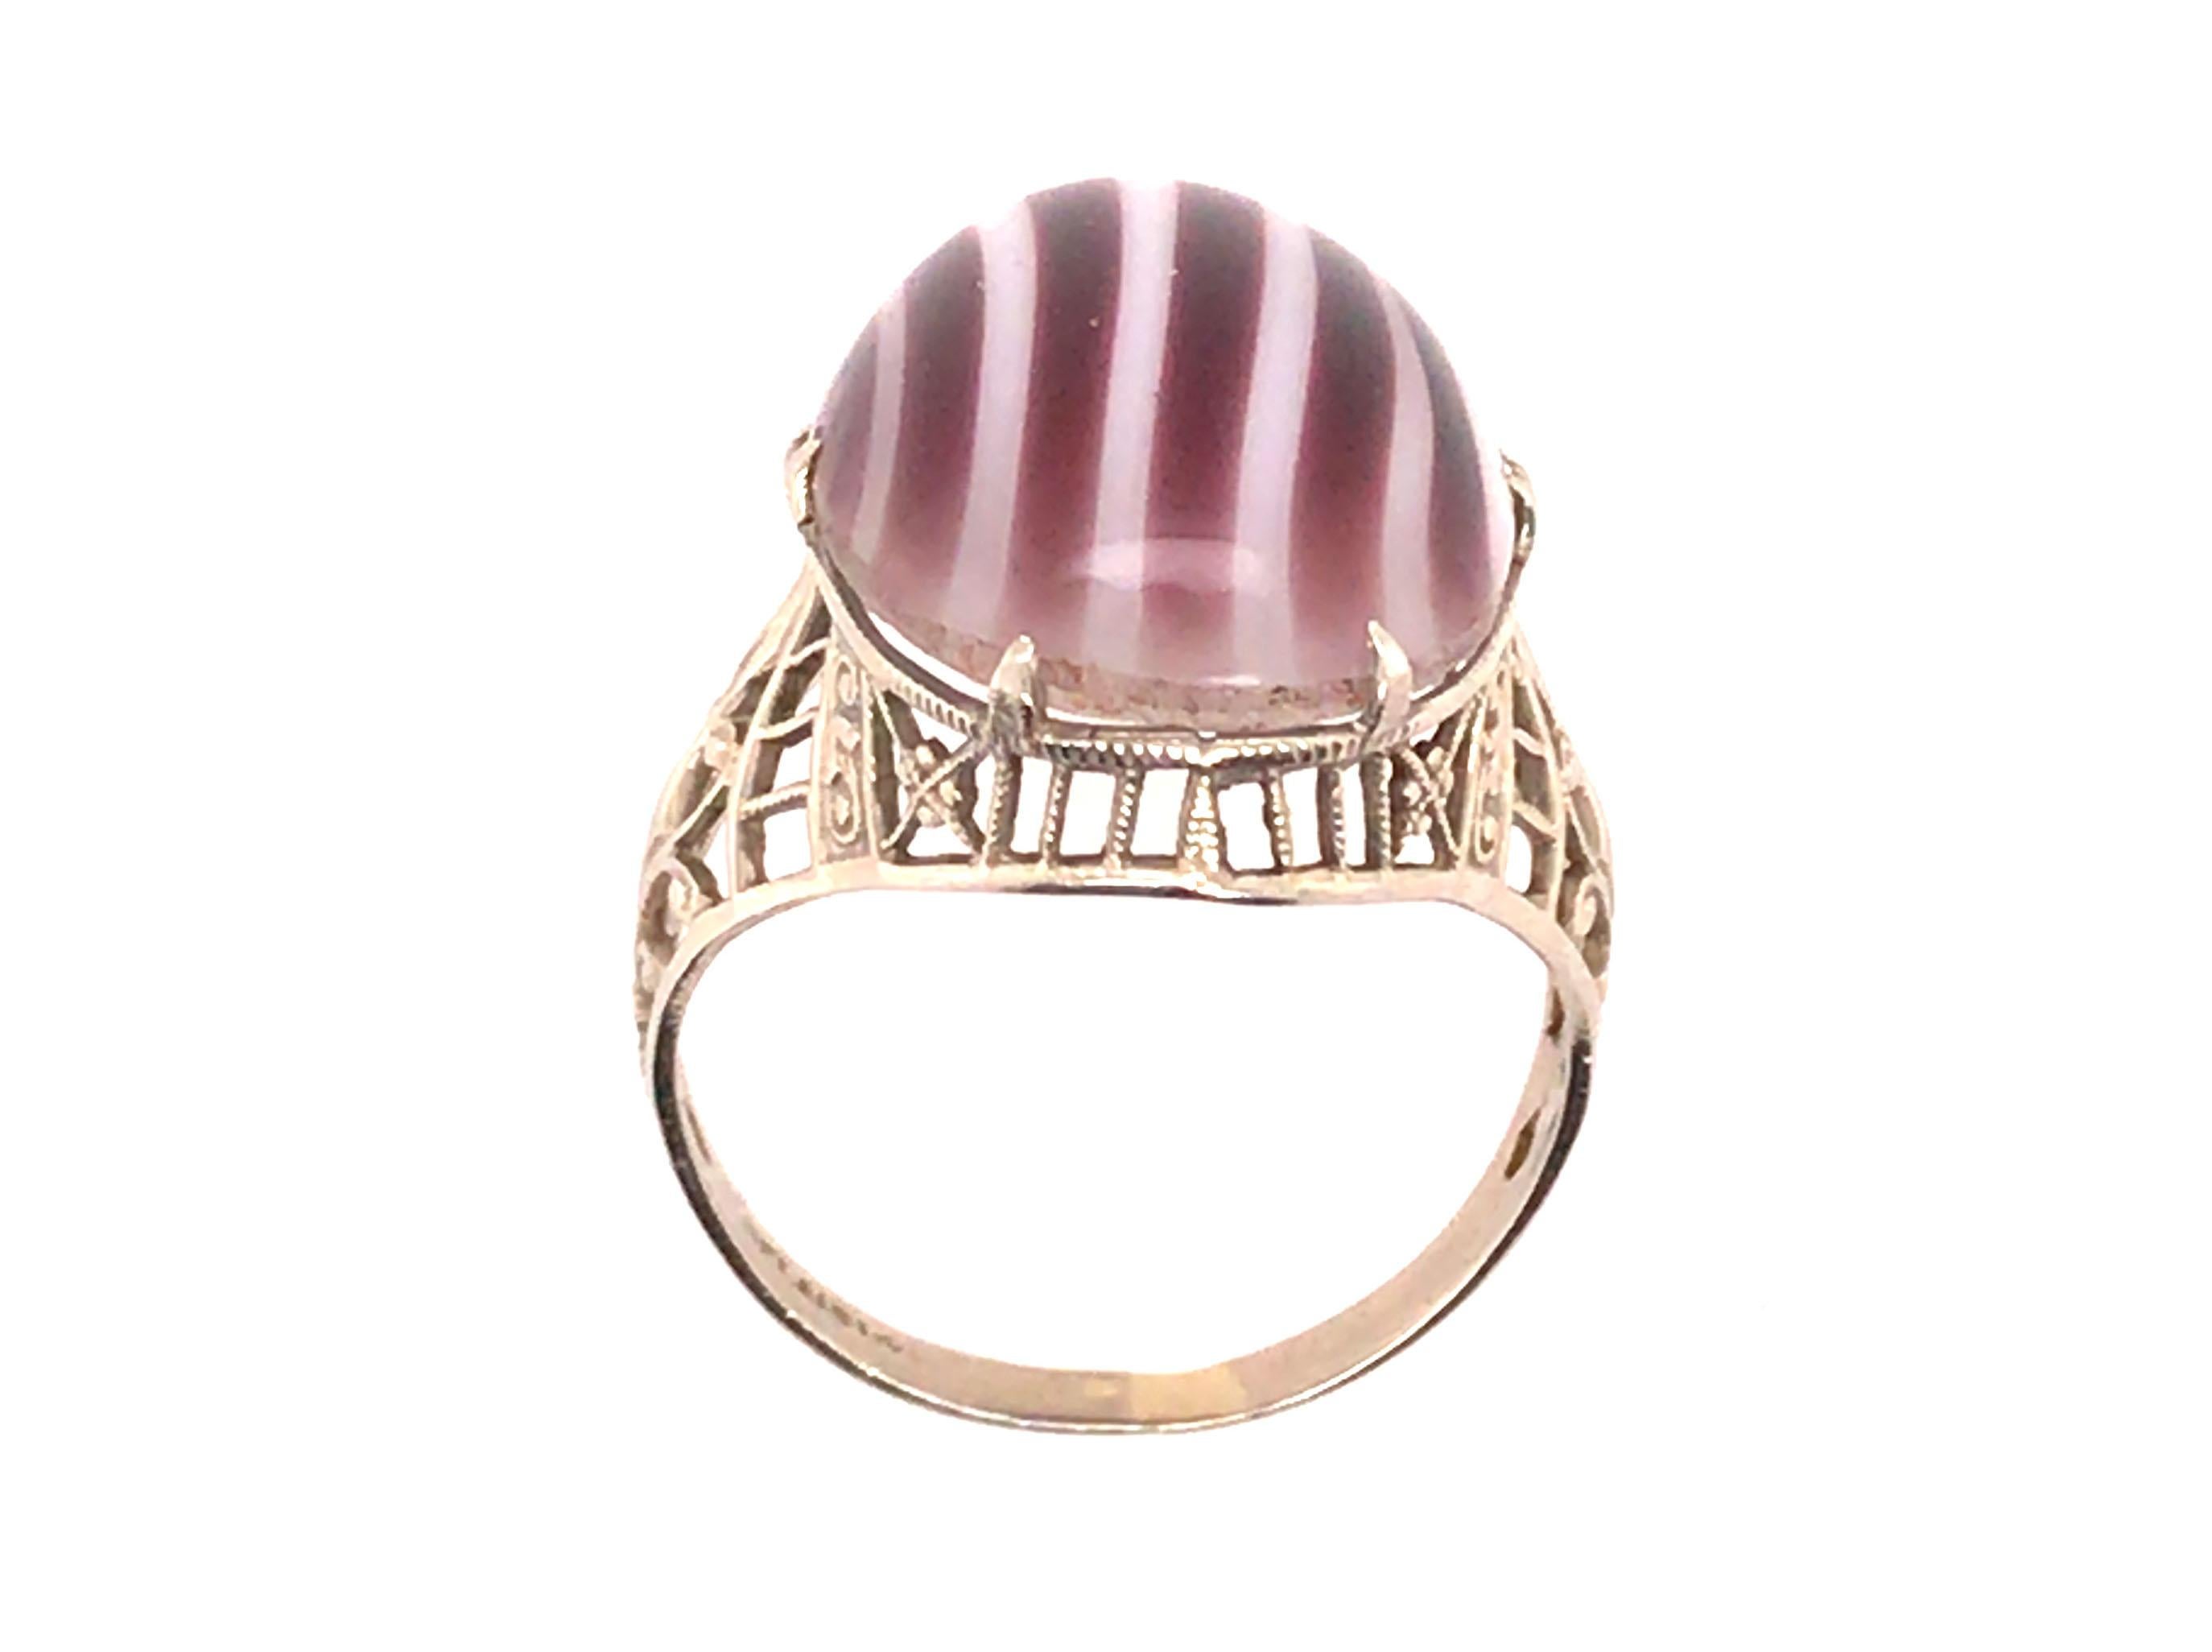 Genuine Original Antique from 1920s Candy Cane Art Glass Cocktail Ring Belais Bros 14K White Gold Vintage Art Deco


Featuring a Gorgeous 18 x 13mm Purple & White Candy Cane Stripped Oval Cabochon Art Glass Center

Genuine Belais Bros Ring

The